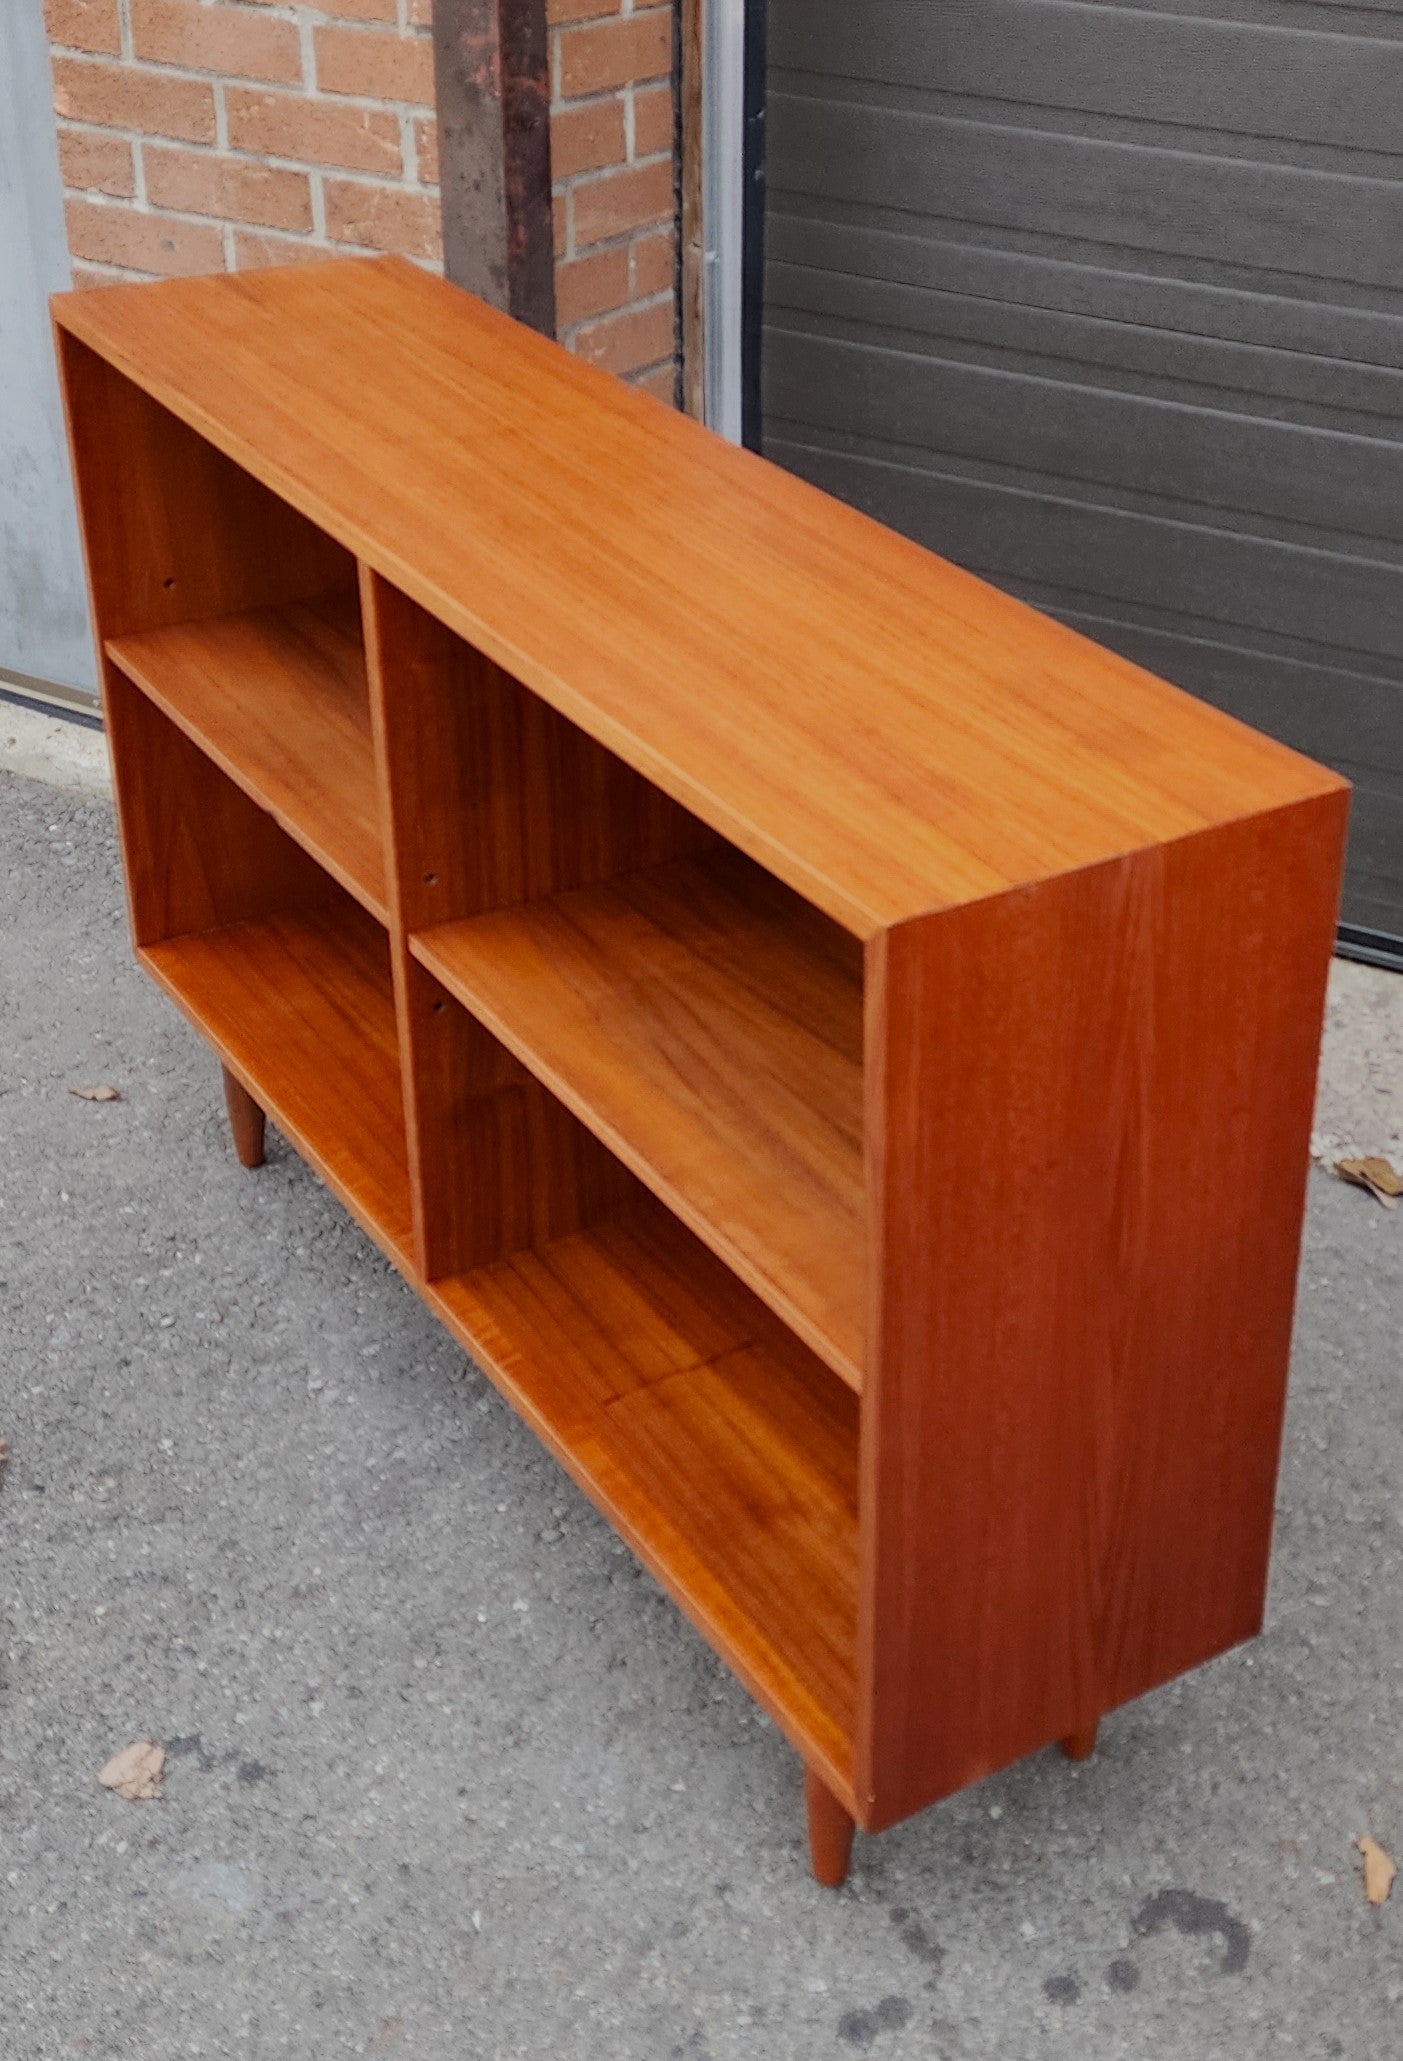 REFINISHED Mid Century Modern Teak Bookcase by Huber